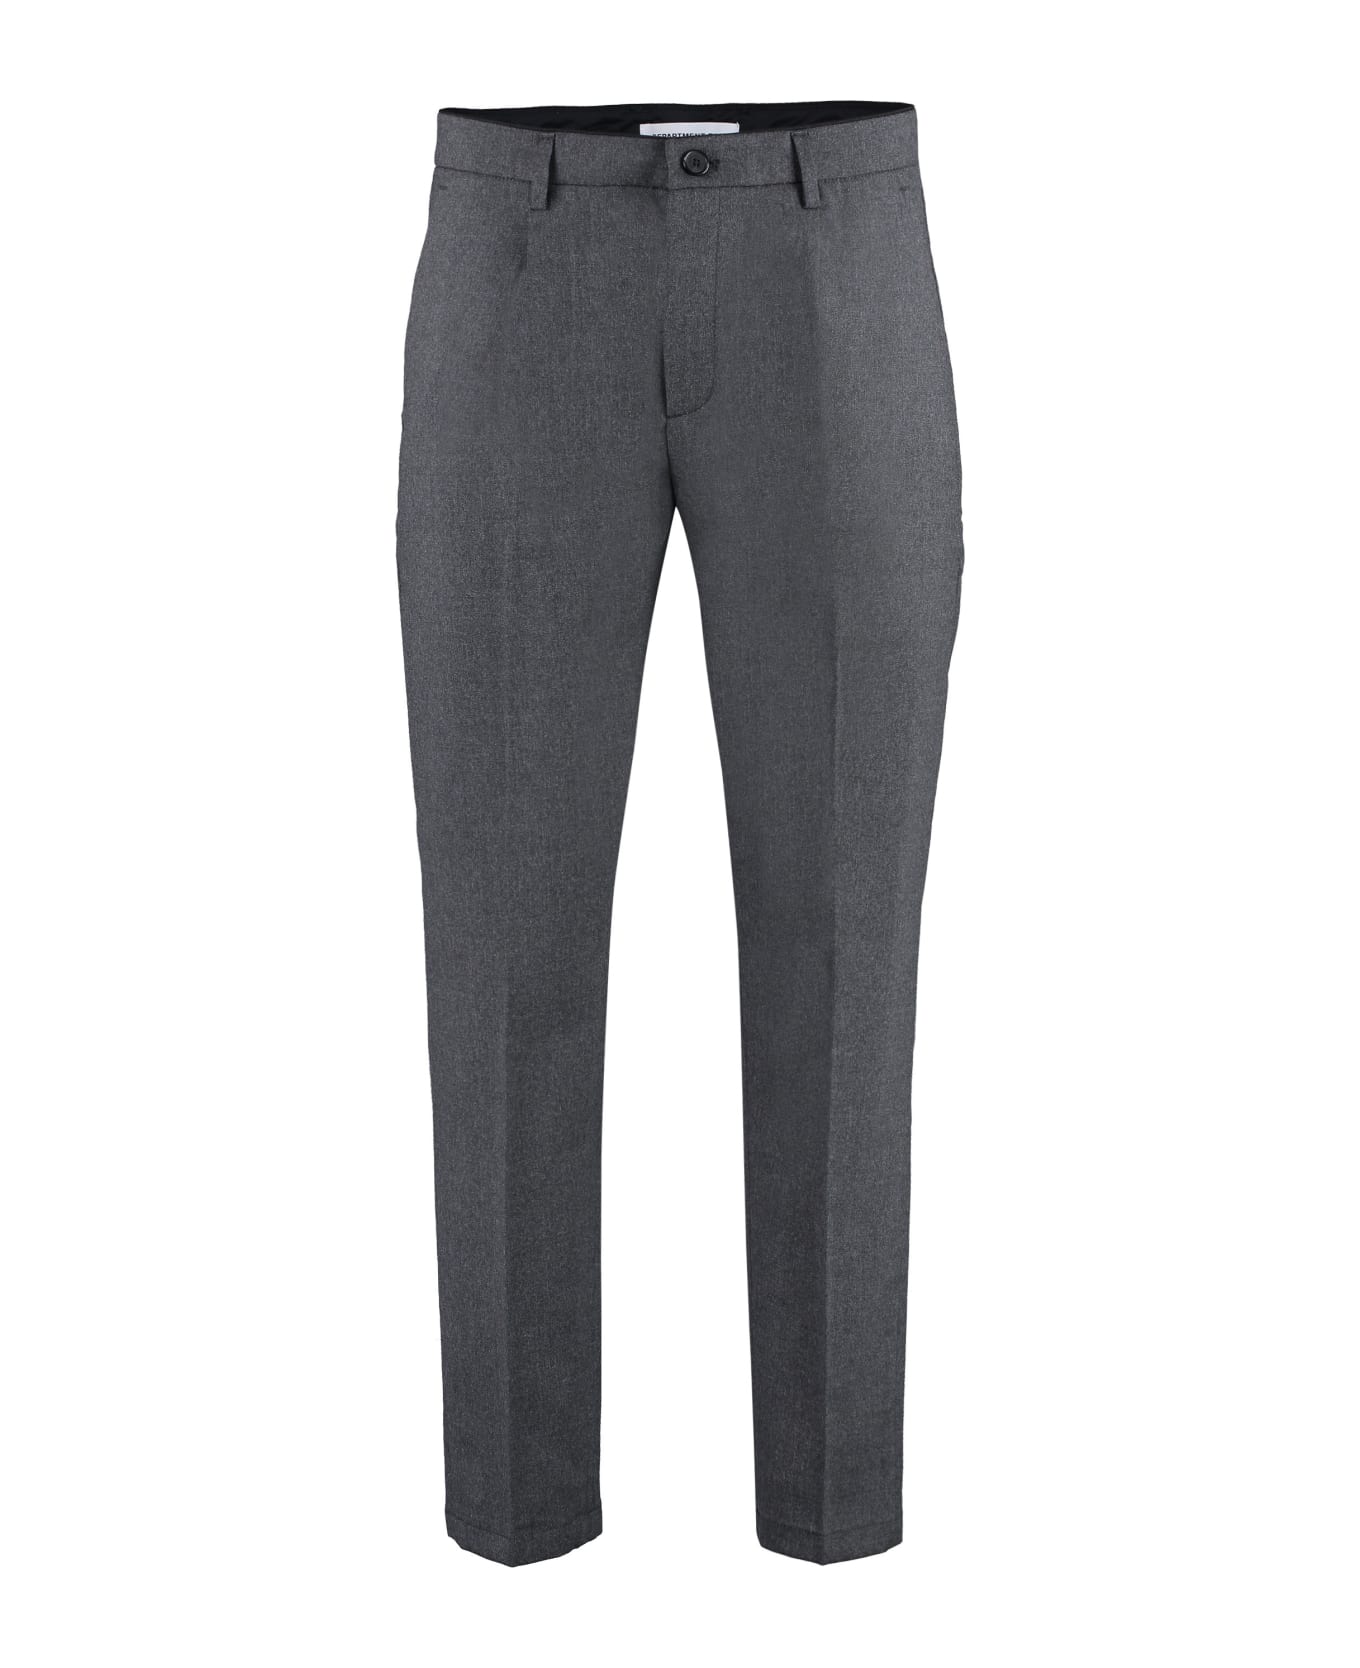 Department Five Prince Wool Blend Trousers - grey